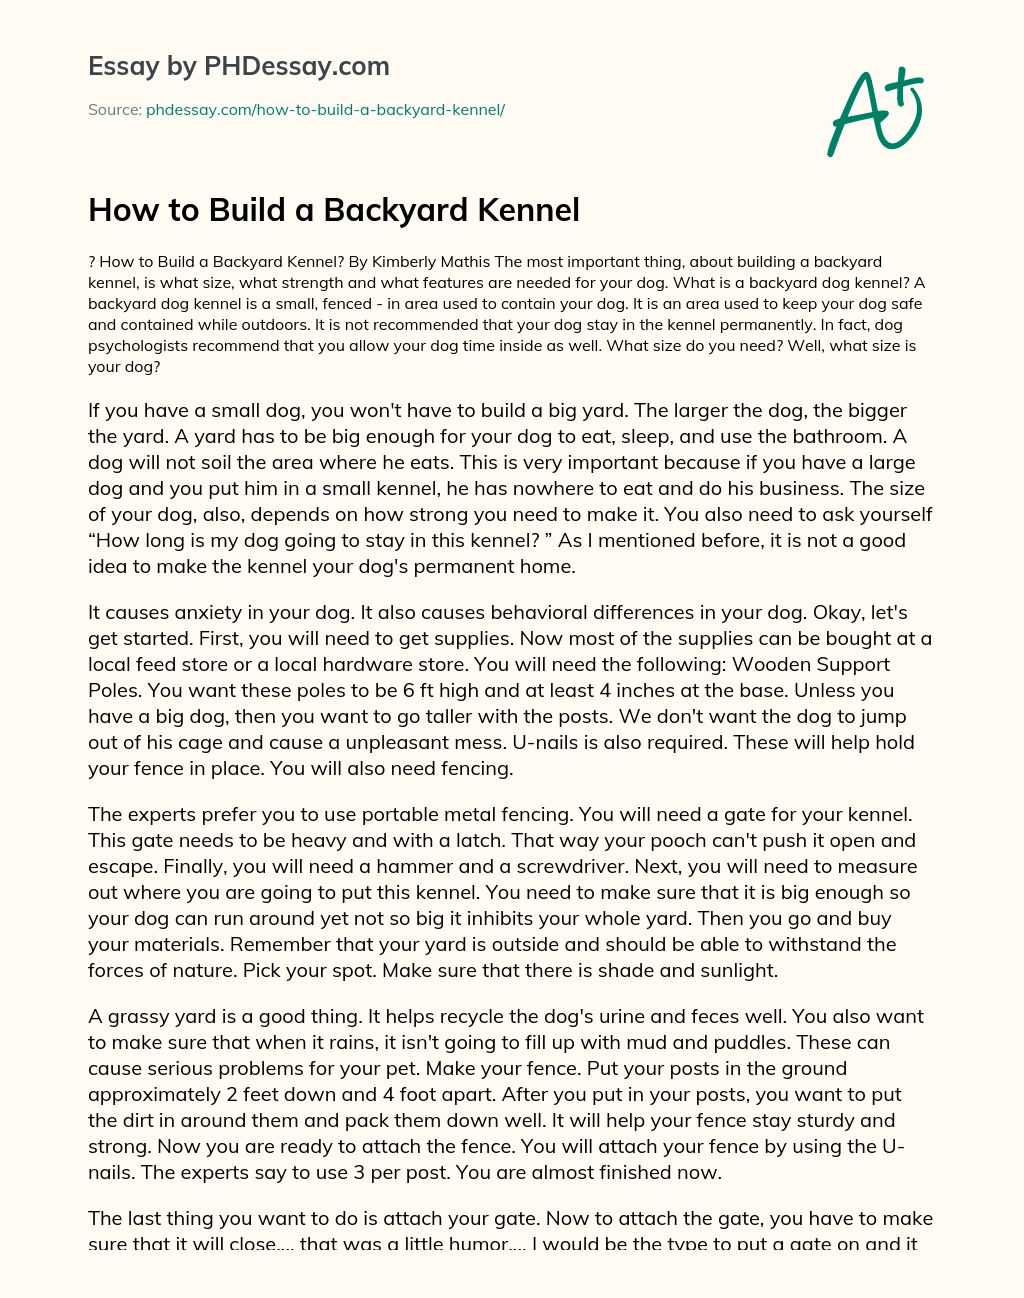 How to Build a Backyard Kennel essay